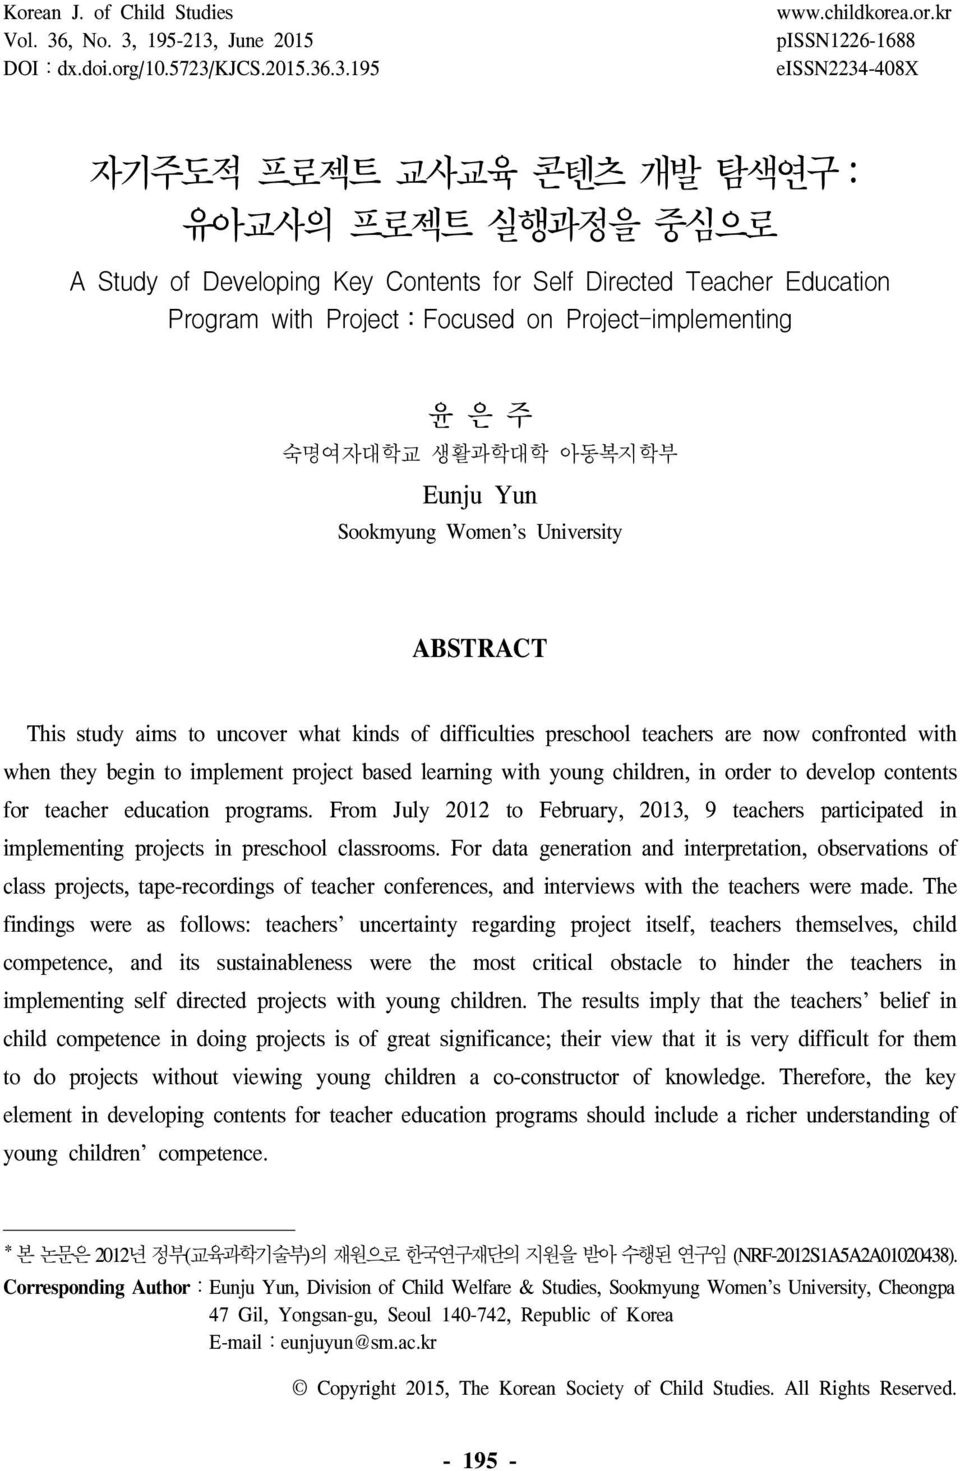 University ABSTRACT This study aims to uncover what kinds of difficulties preschool teachers are now confronted with when they begin to implement project based learning with young children, in order